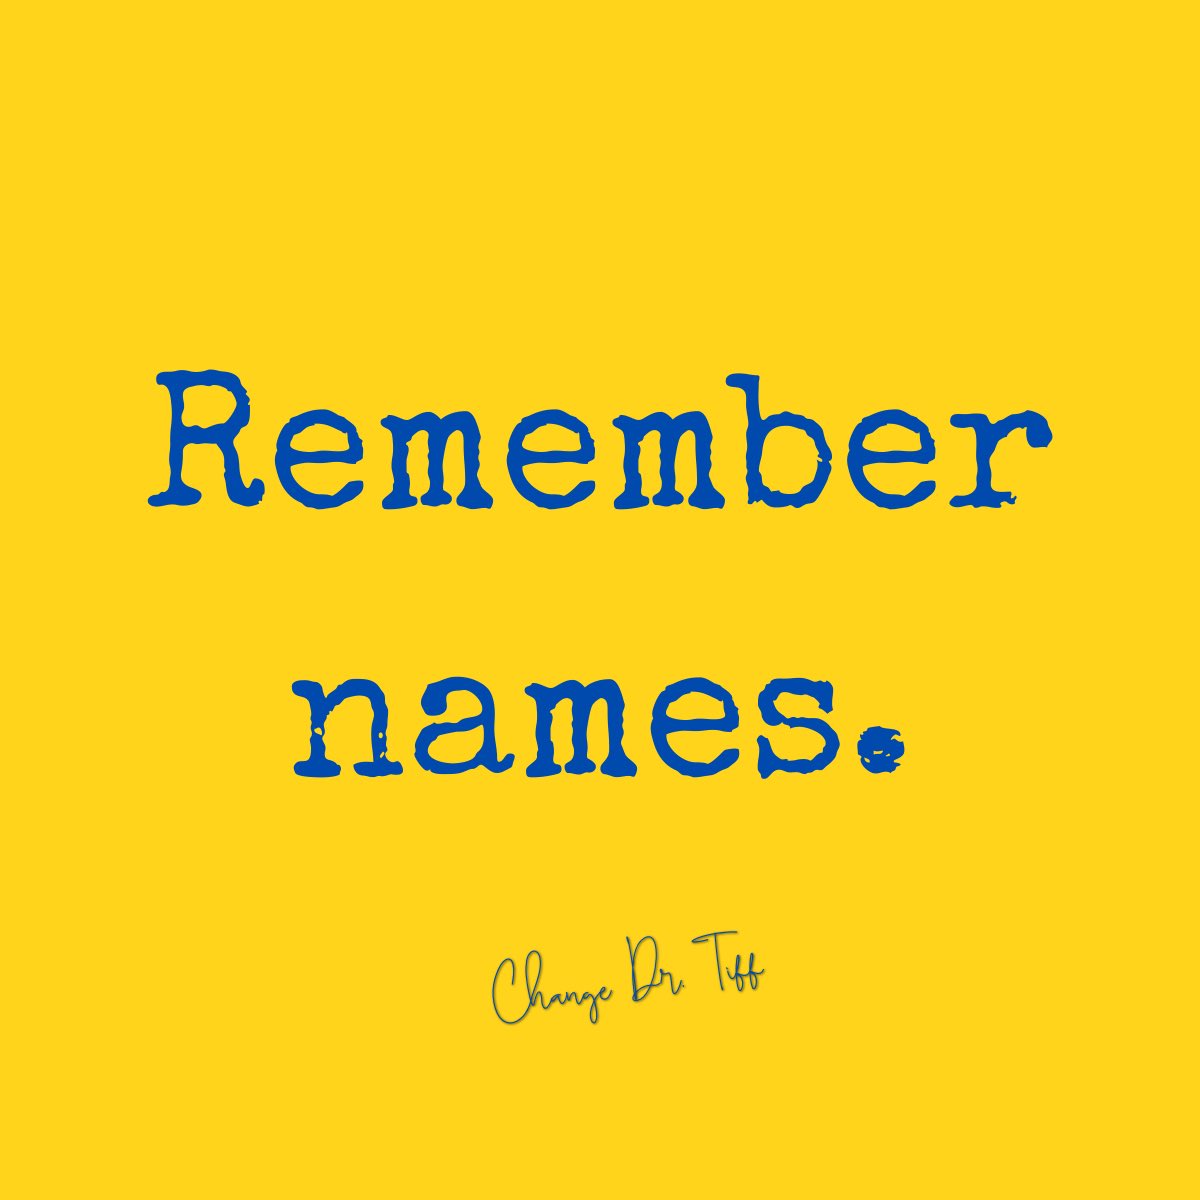 Remember names - it shows respect and builds rapport.

#BeTheChange #ChangeDrTiff